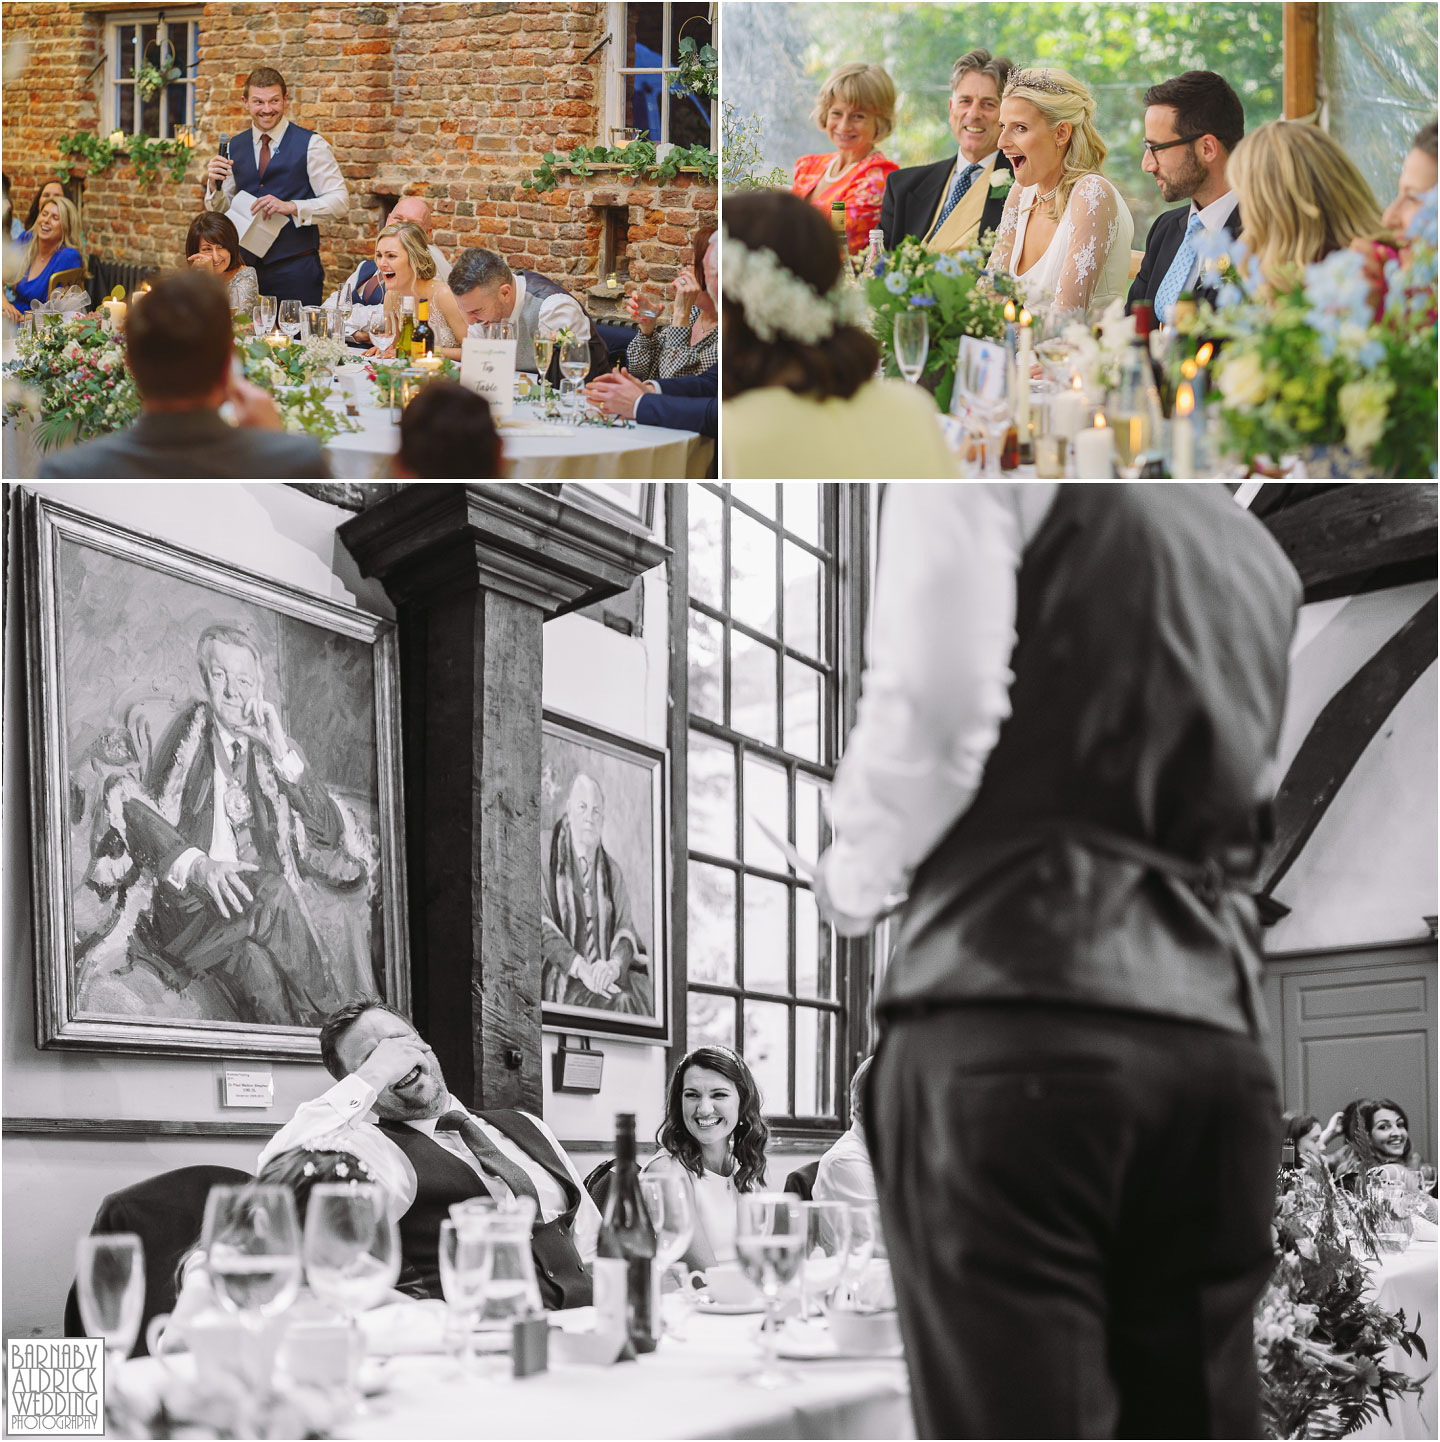 Candid speech photos at Meols Hall near Southport by Wedding Photographer Barnaby Aldrick